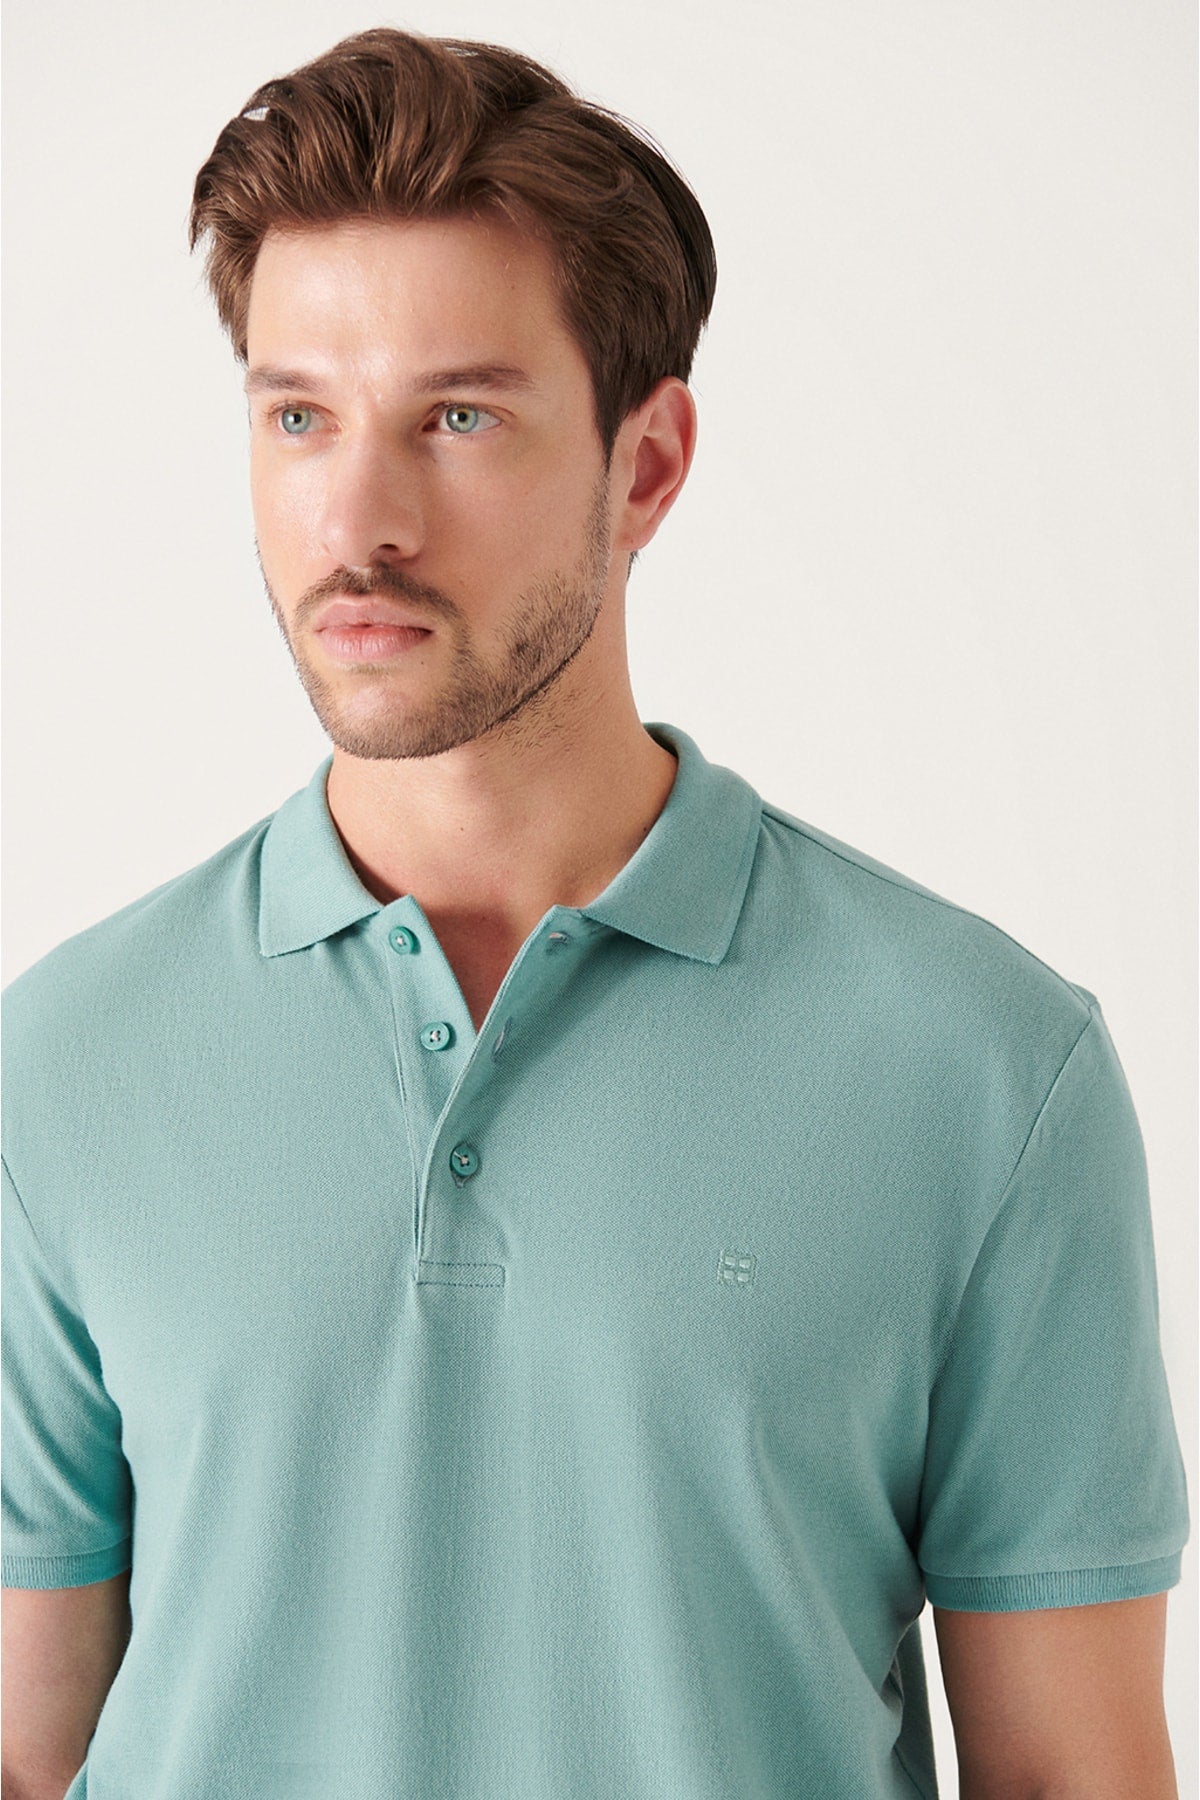 Men's Water Green 100% Cotton Breathable Standard Fit Normal Cut Polo Neck T-shirt E001004